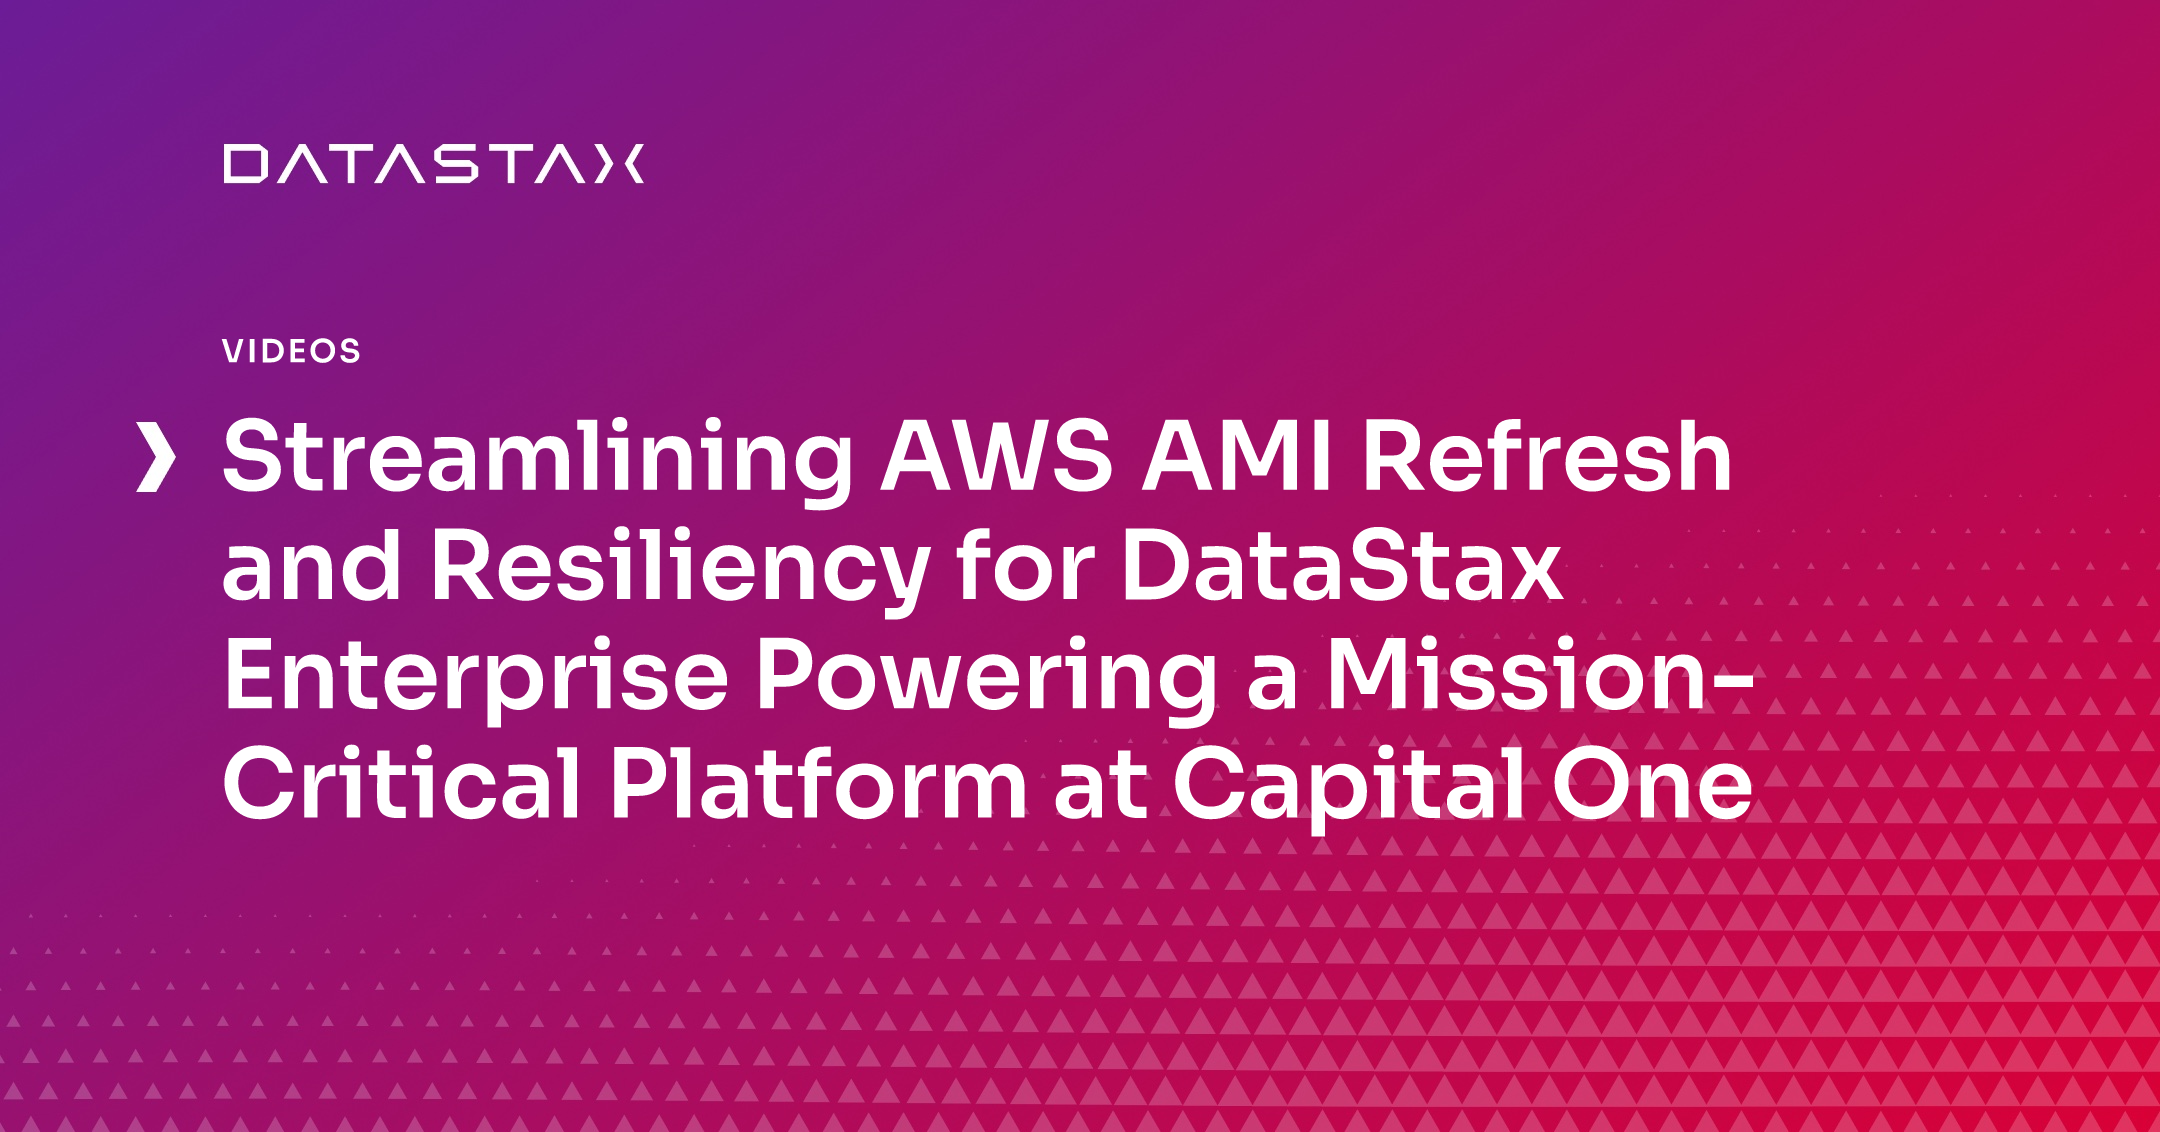 Streamlining AWS AMI Refresh and Resiliency for DataStax Enterprise Powering a Mission-Critical Platform at Capital One